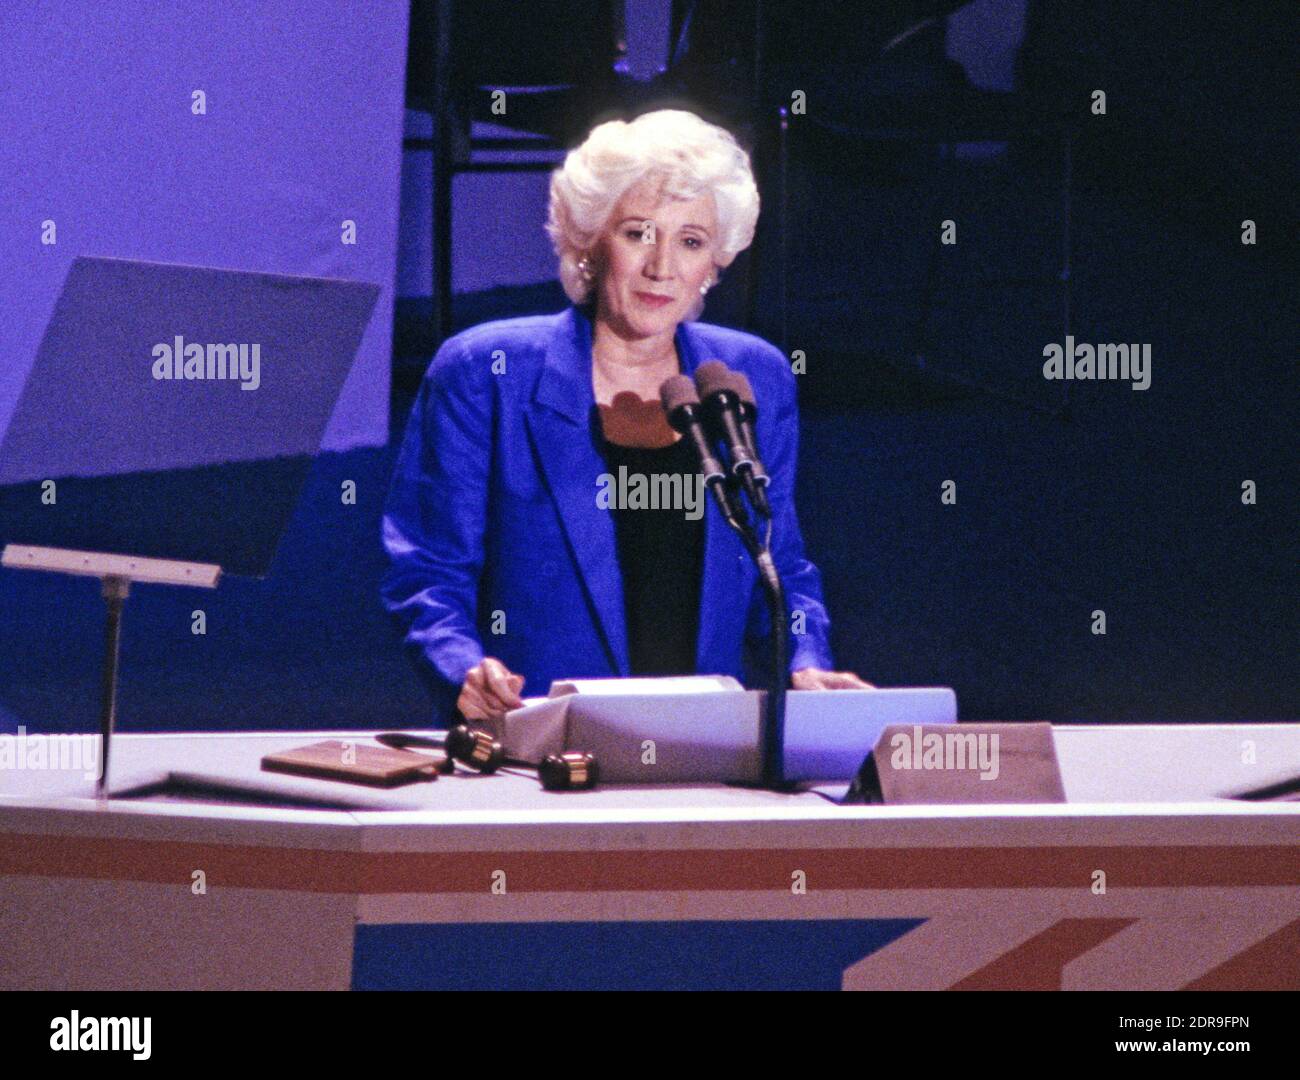 Oscar Award-winning actress Olympia Dukakis, makes remarks supporting her cousin, Governor Michael Dukakis (Democrat of Massachusetts), the 1988 Democratic Party nominee for President of the United States, at the 1988 Democratic National Convention in the Omni Coliseum in Atlanta, Georgia on July 21, 1988. Photo by Arnie Sachs/CNP/ABACAPRESS.COM Stock Photo